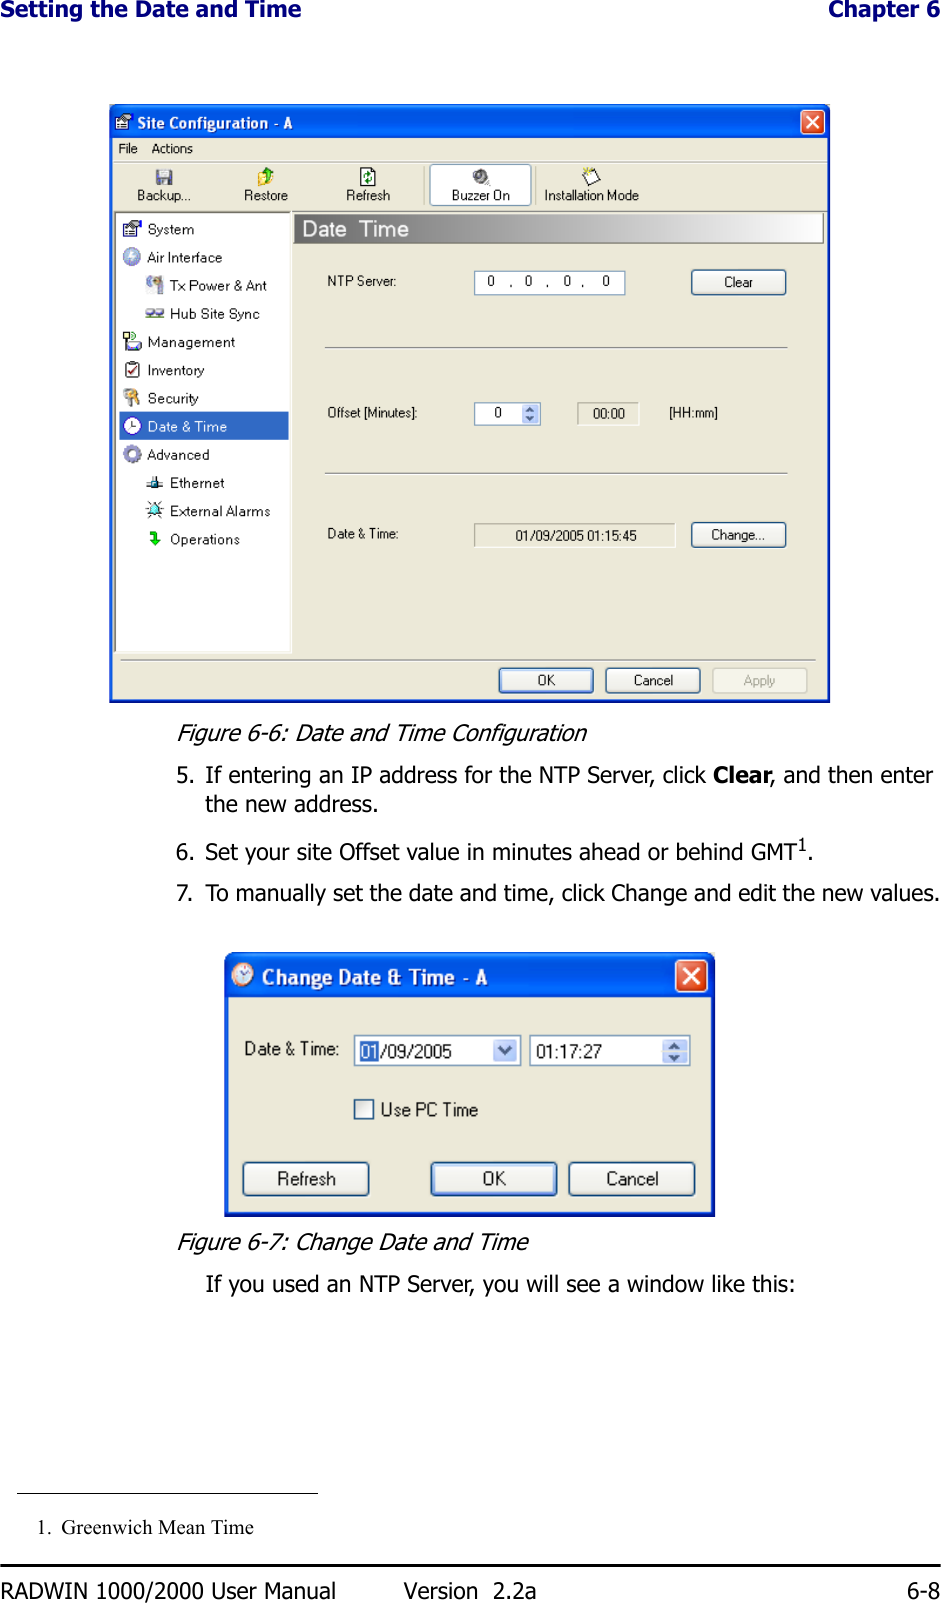 Setting the Date and Time  Chapter 6RADWIN 1000/2000 User Manual Version  2.2a 6-8Figure 6-6: Date and Time Configuration5. If entering an IP address for the NTP Server, click Clear, and then enter the new address.6. Set your site Offset value in minutes ahead or behind GMT1.7. To manually set the date and time, click Change and edit the new values.Figure 6-7: Change Date and Time If you used an NTP Server, you will see a window like this:1. Greenwich Mean Time